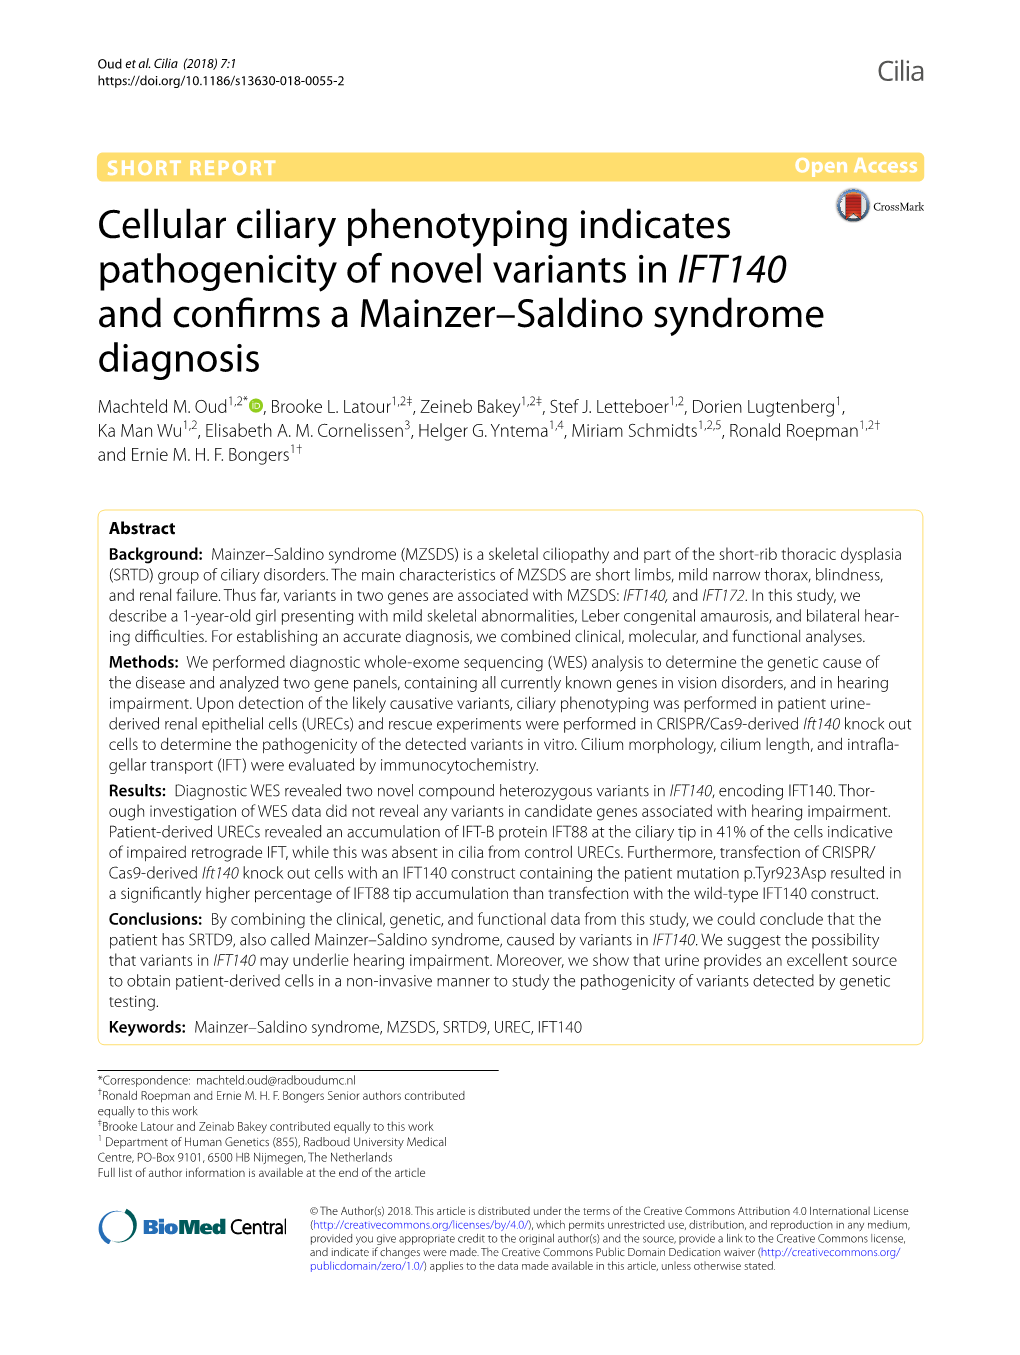 Cellular Ciliary Phenotyping Indicates Pathogenicity of Novel Variants in IFT140 and Confrms a Mainzer–Saldino Syndrome Diagnosis Machteld M